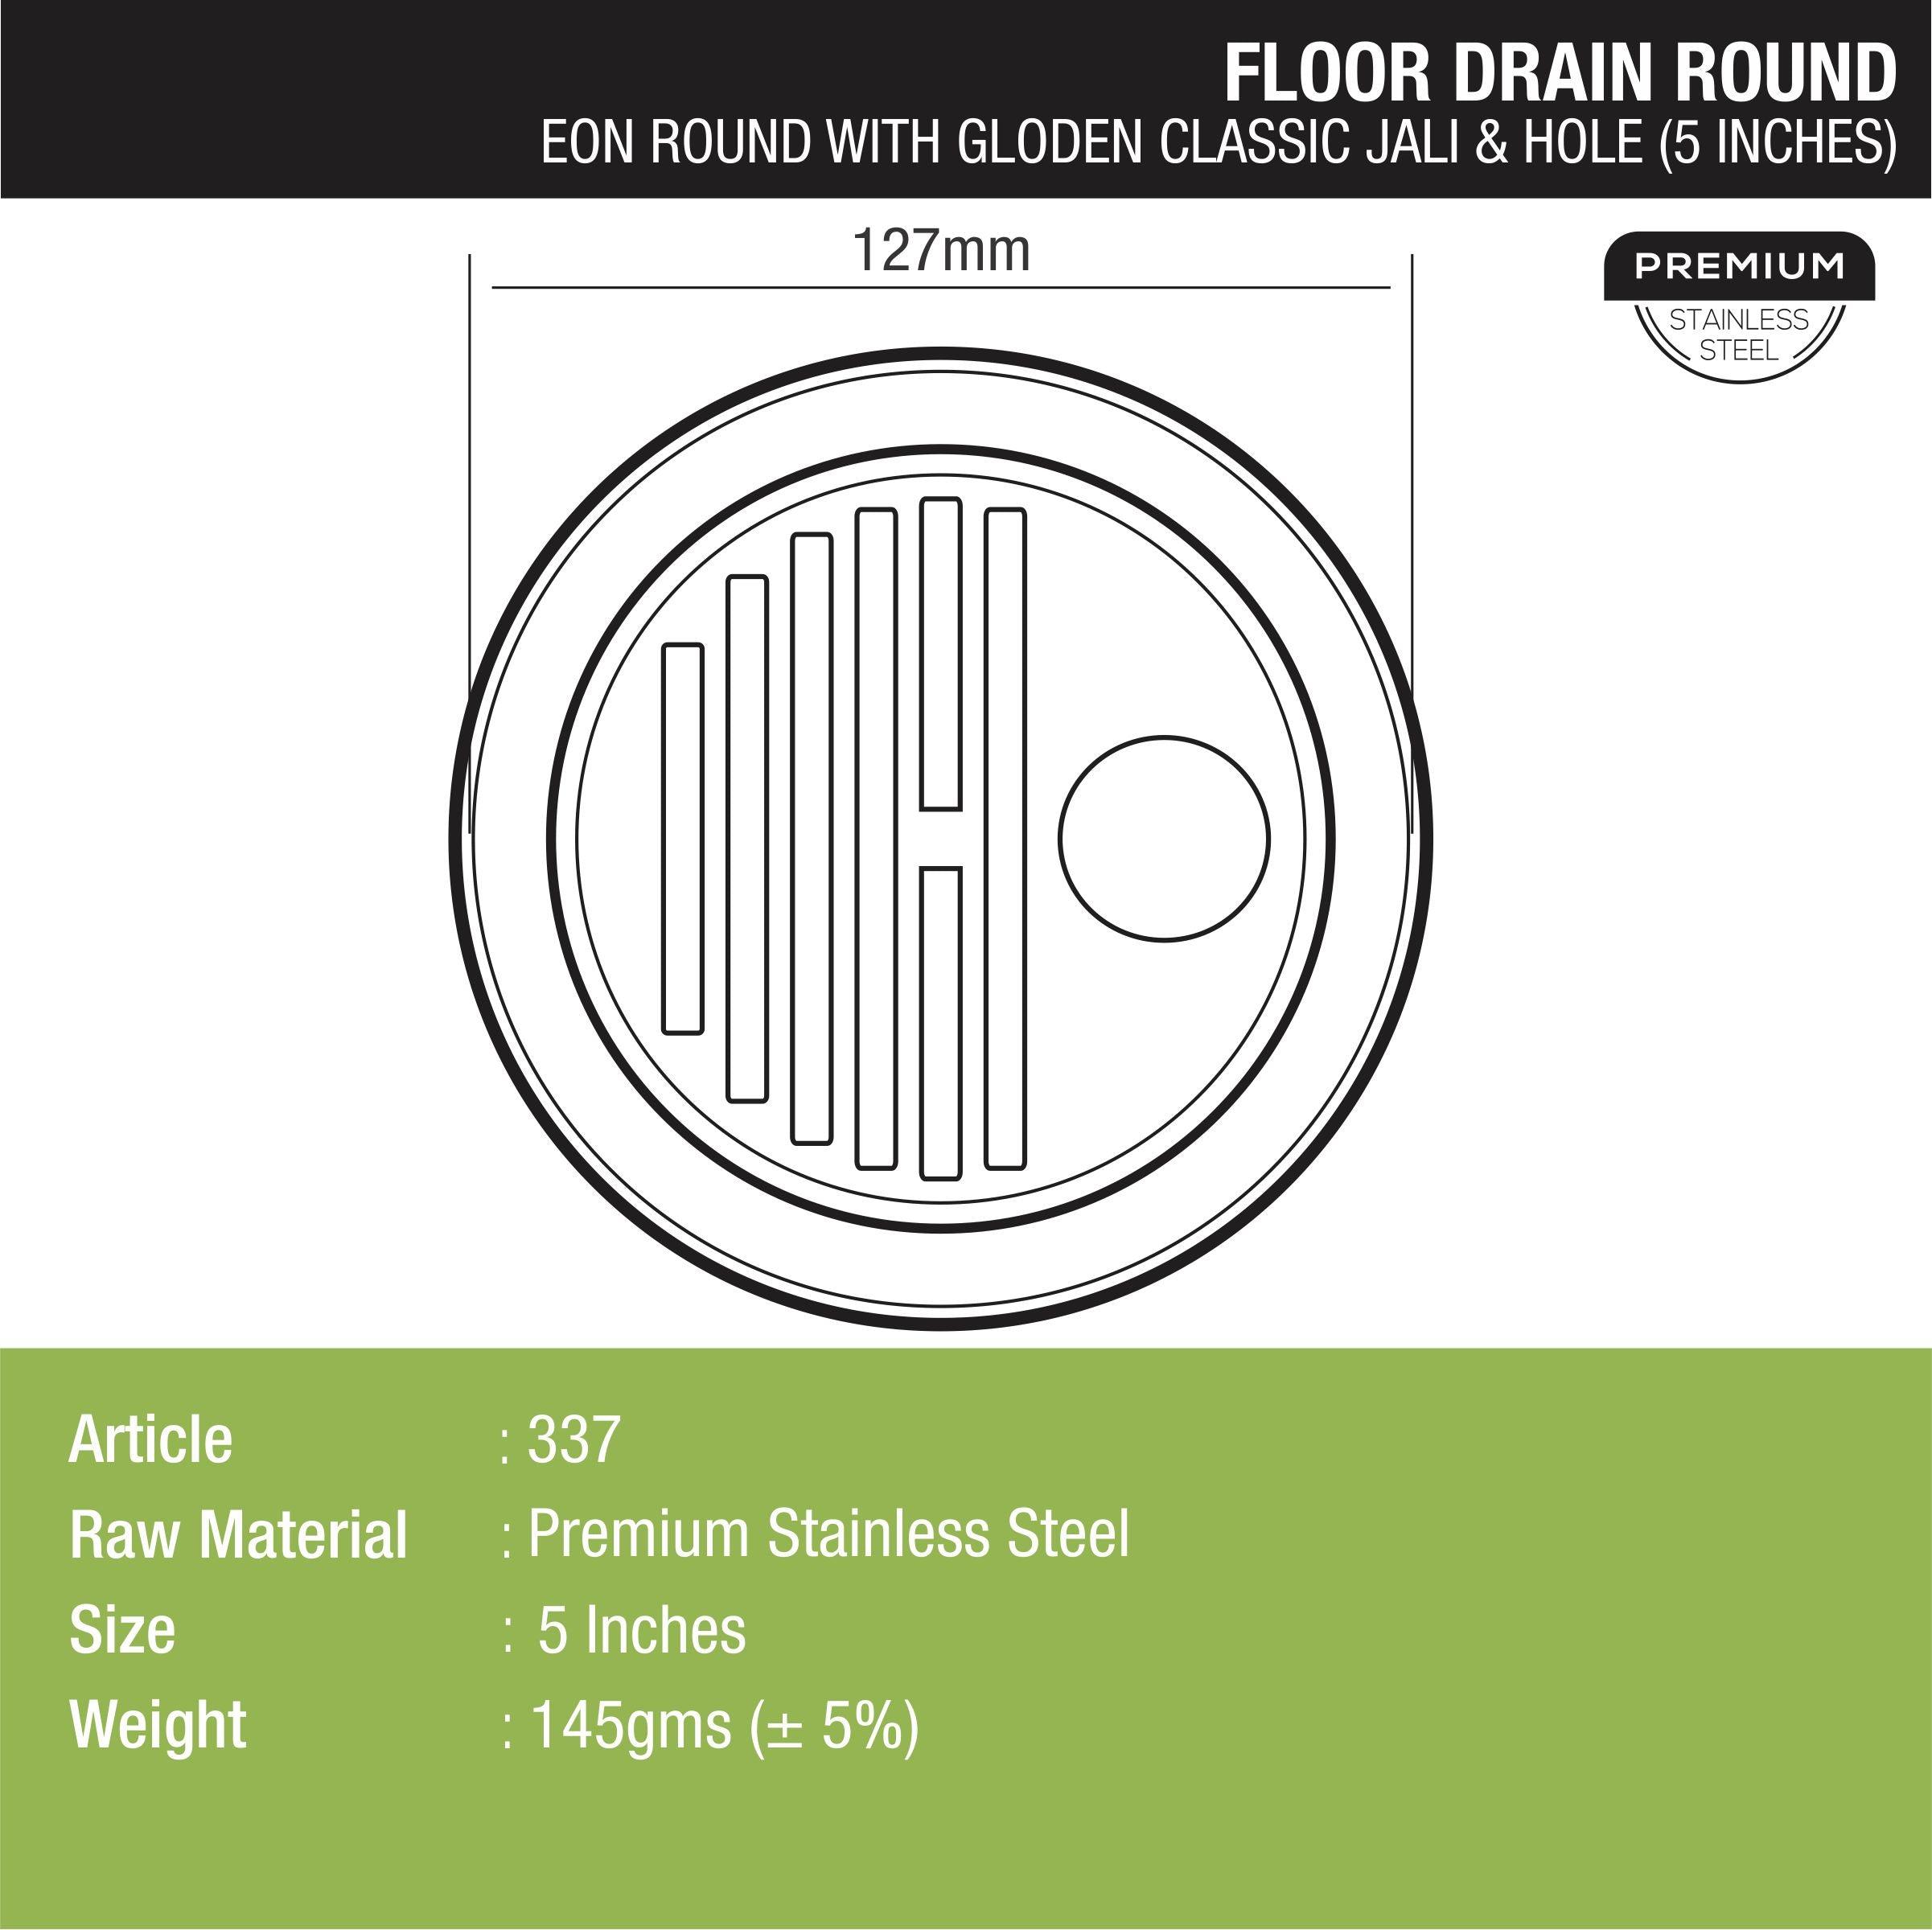 Eon Round Floor Drain with Golden Classic Jali & Hole (5 inches) dimensions and sizes